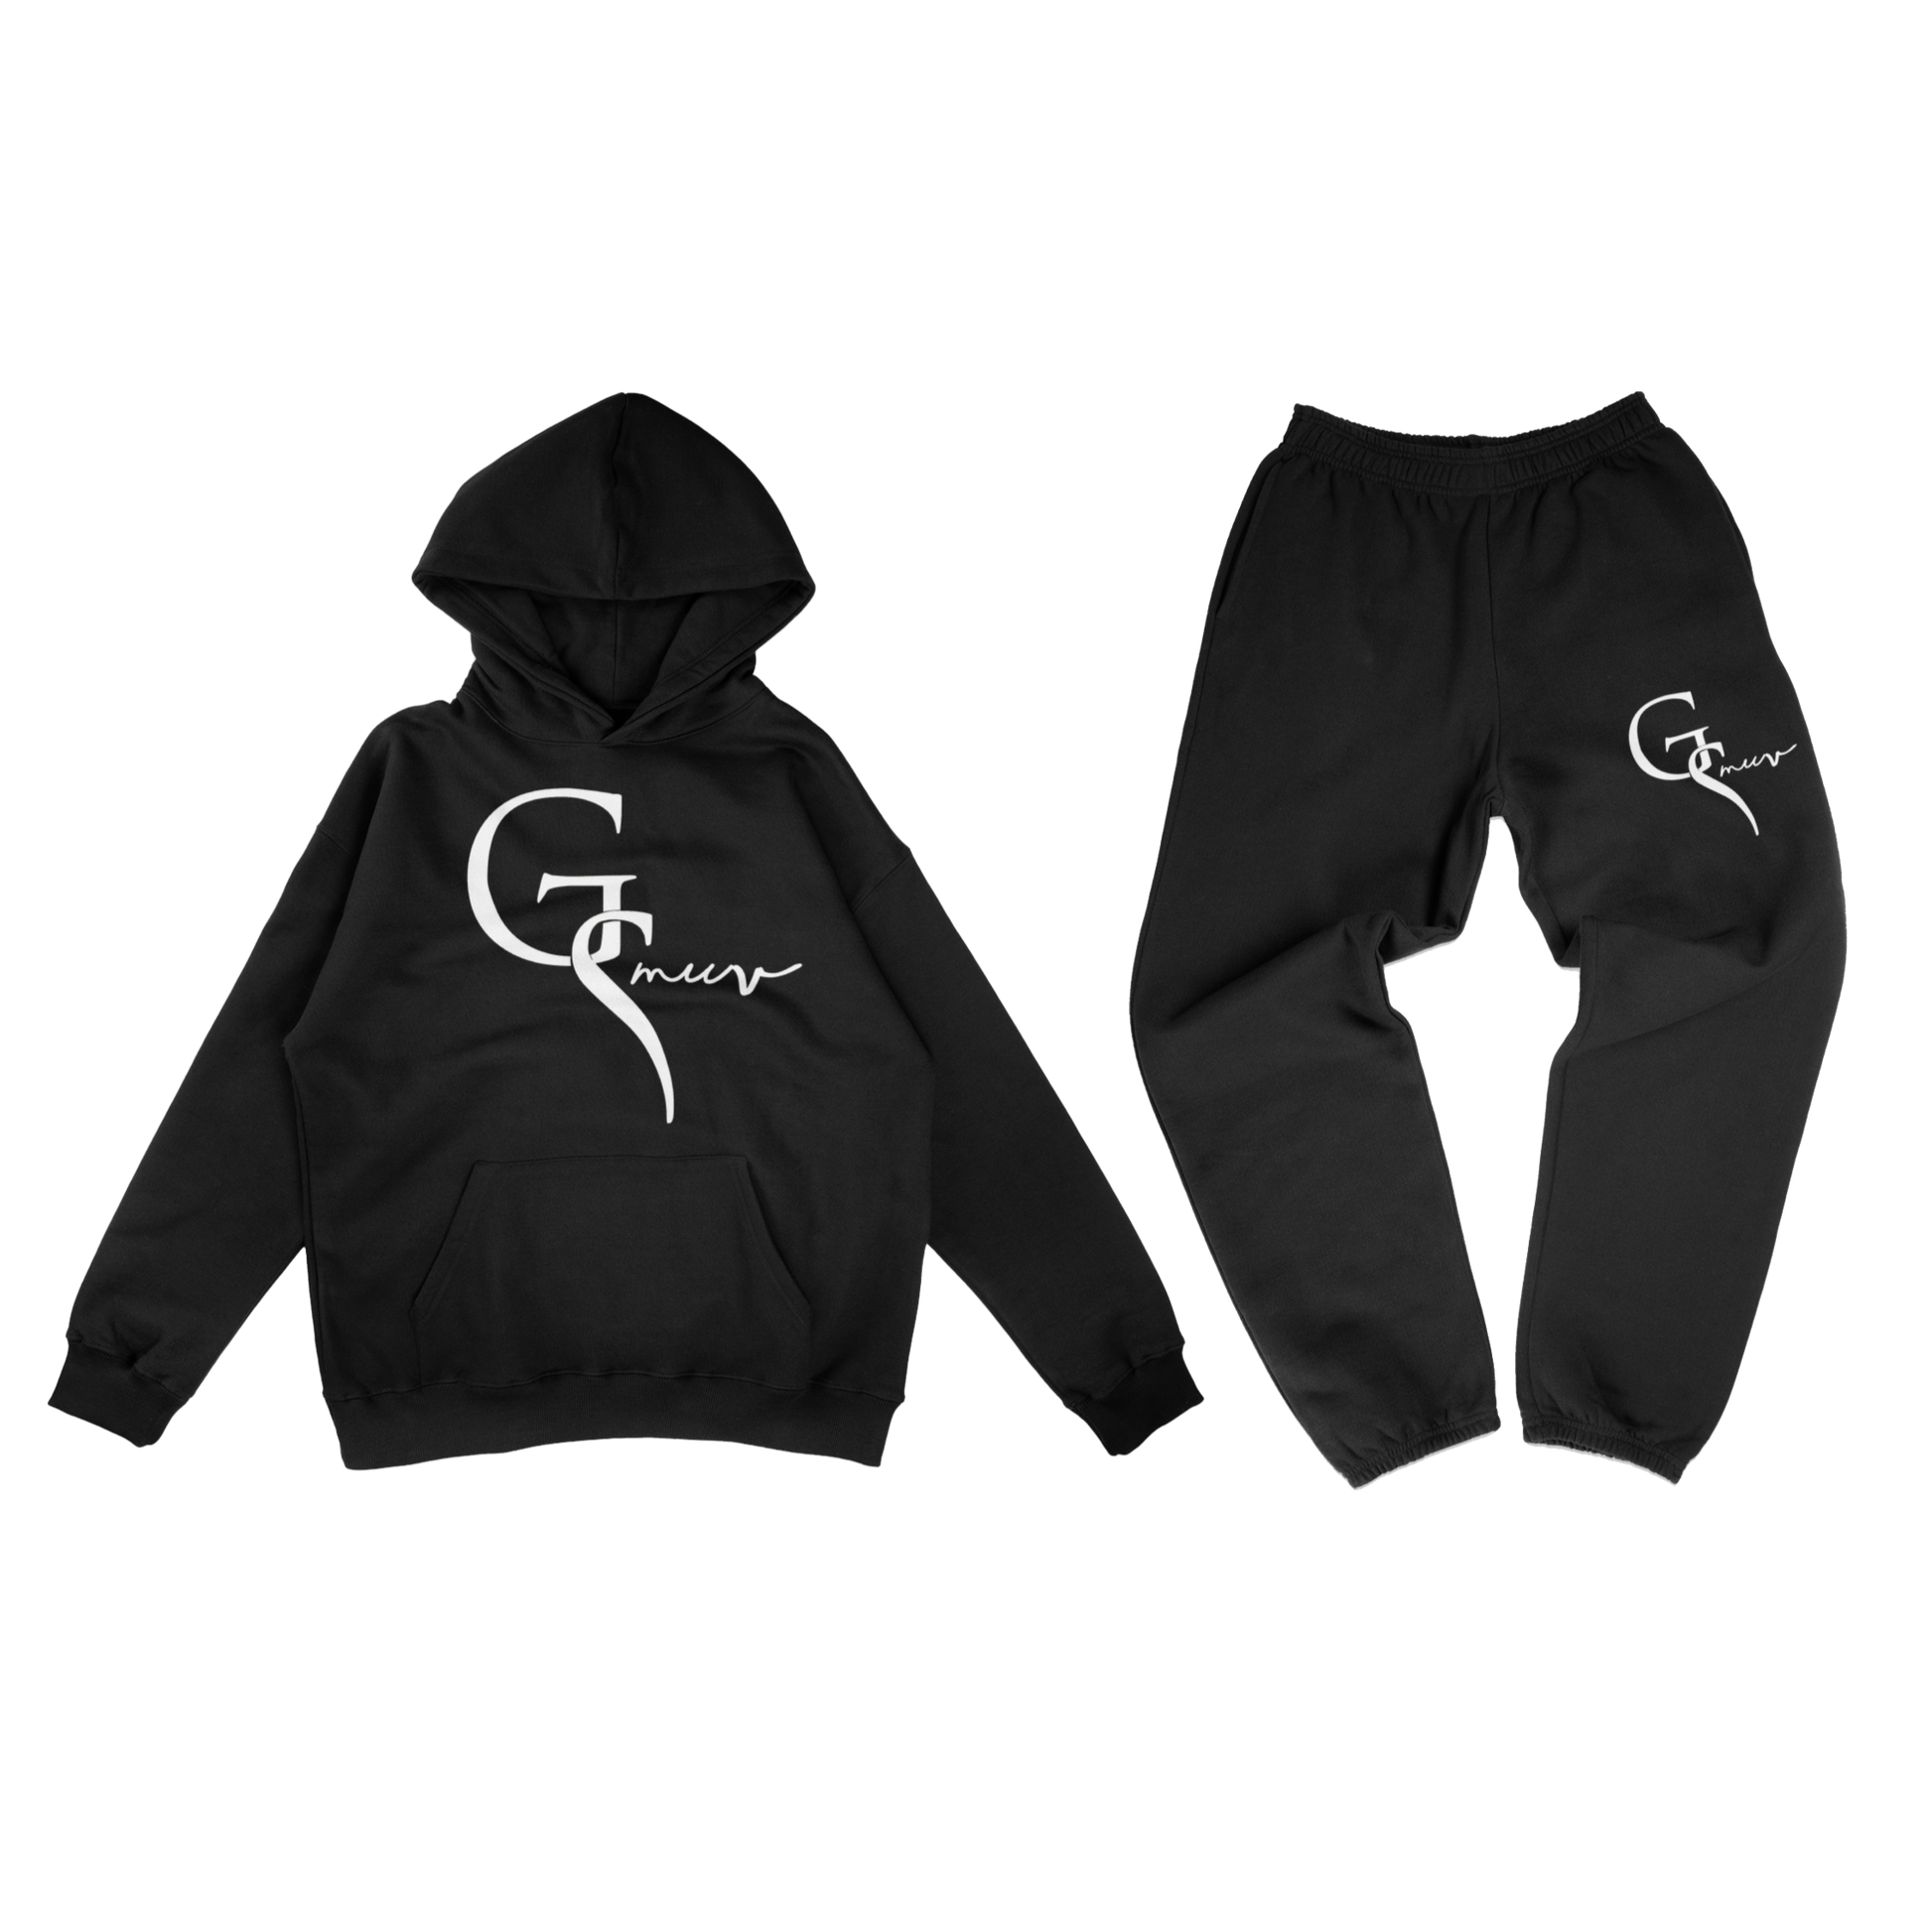 A black hoodie with a white GSMUV logo and black sweatpants. The hoodie has a white logo on the front that says "G". The sweatpants have a white GSMUV logo on the front left pocket.